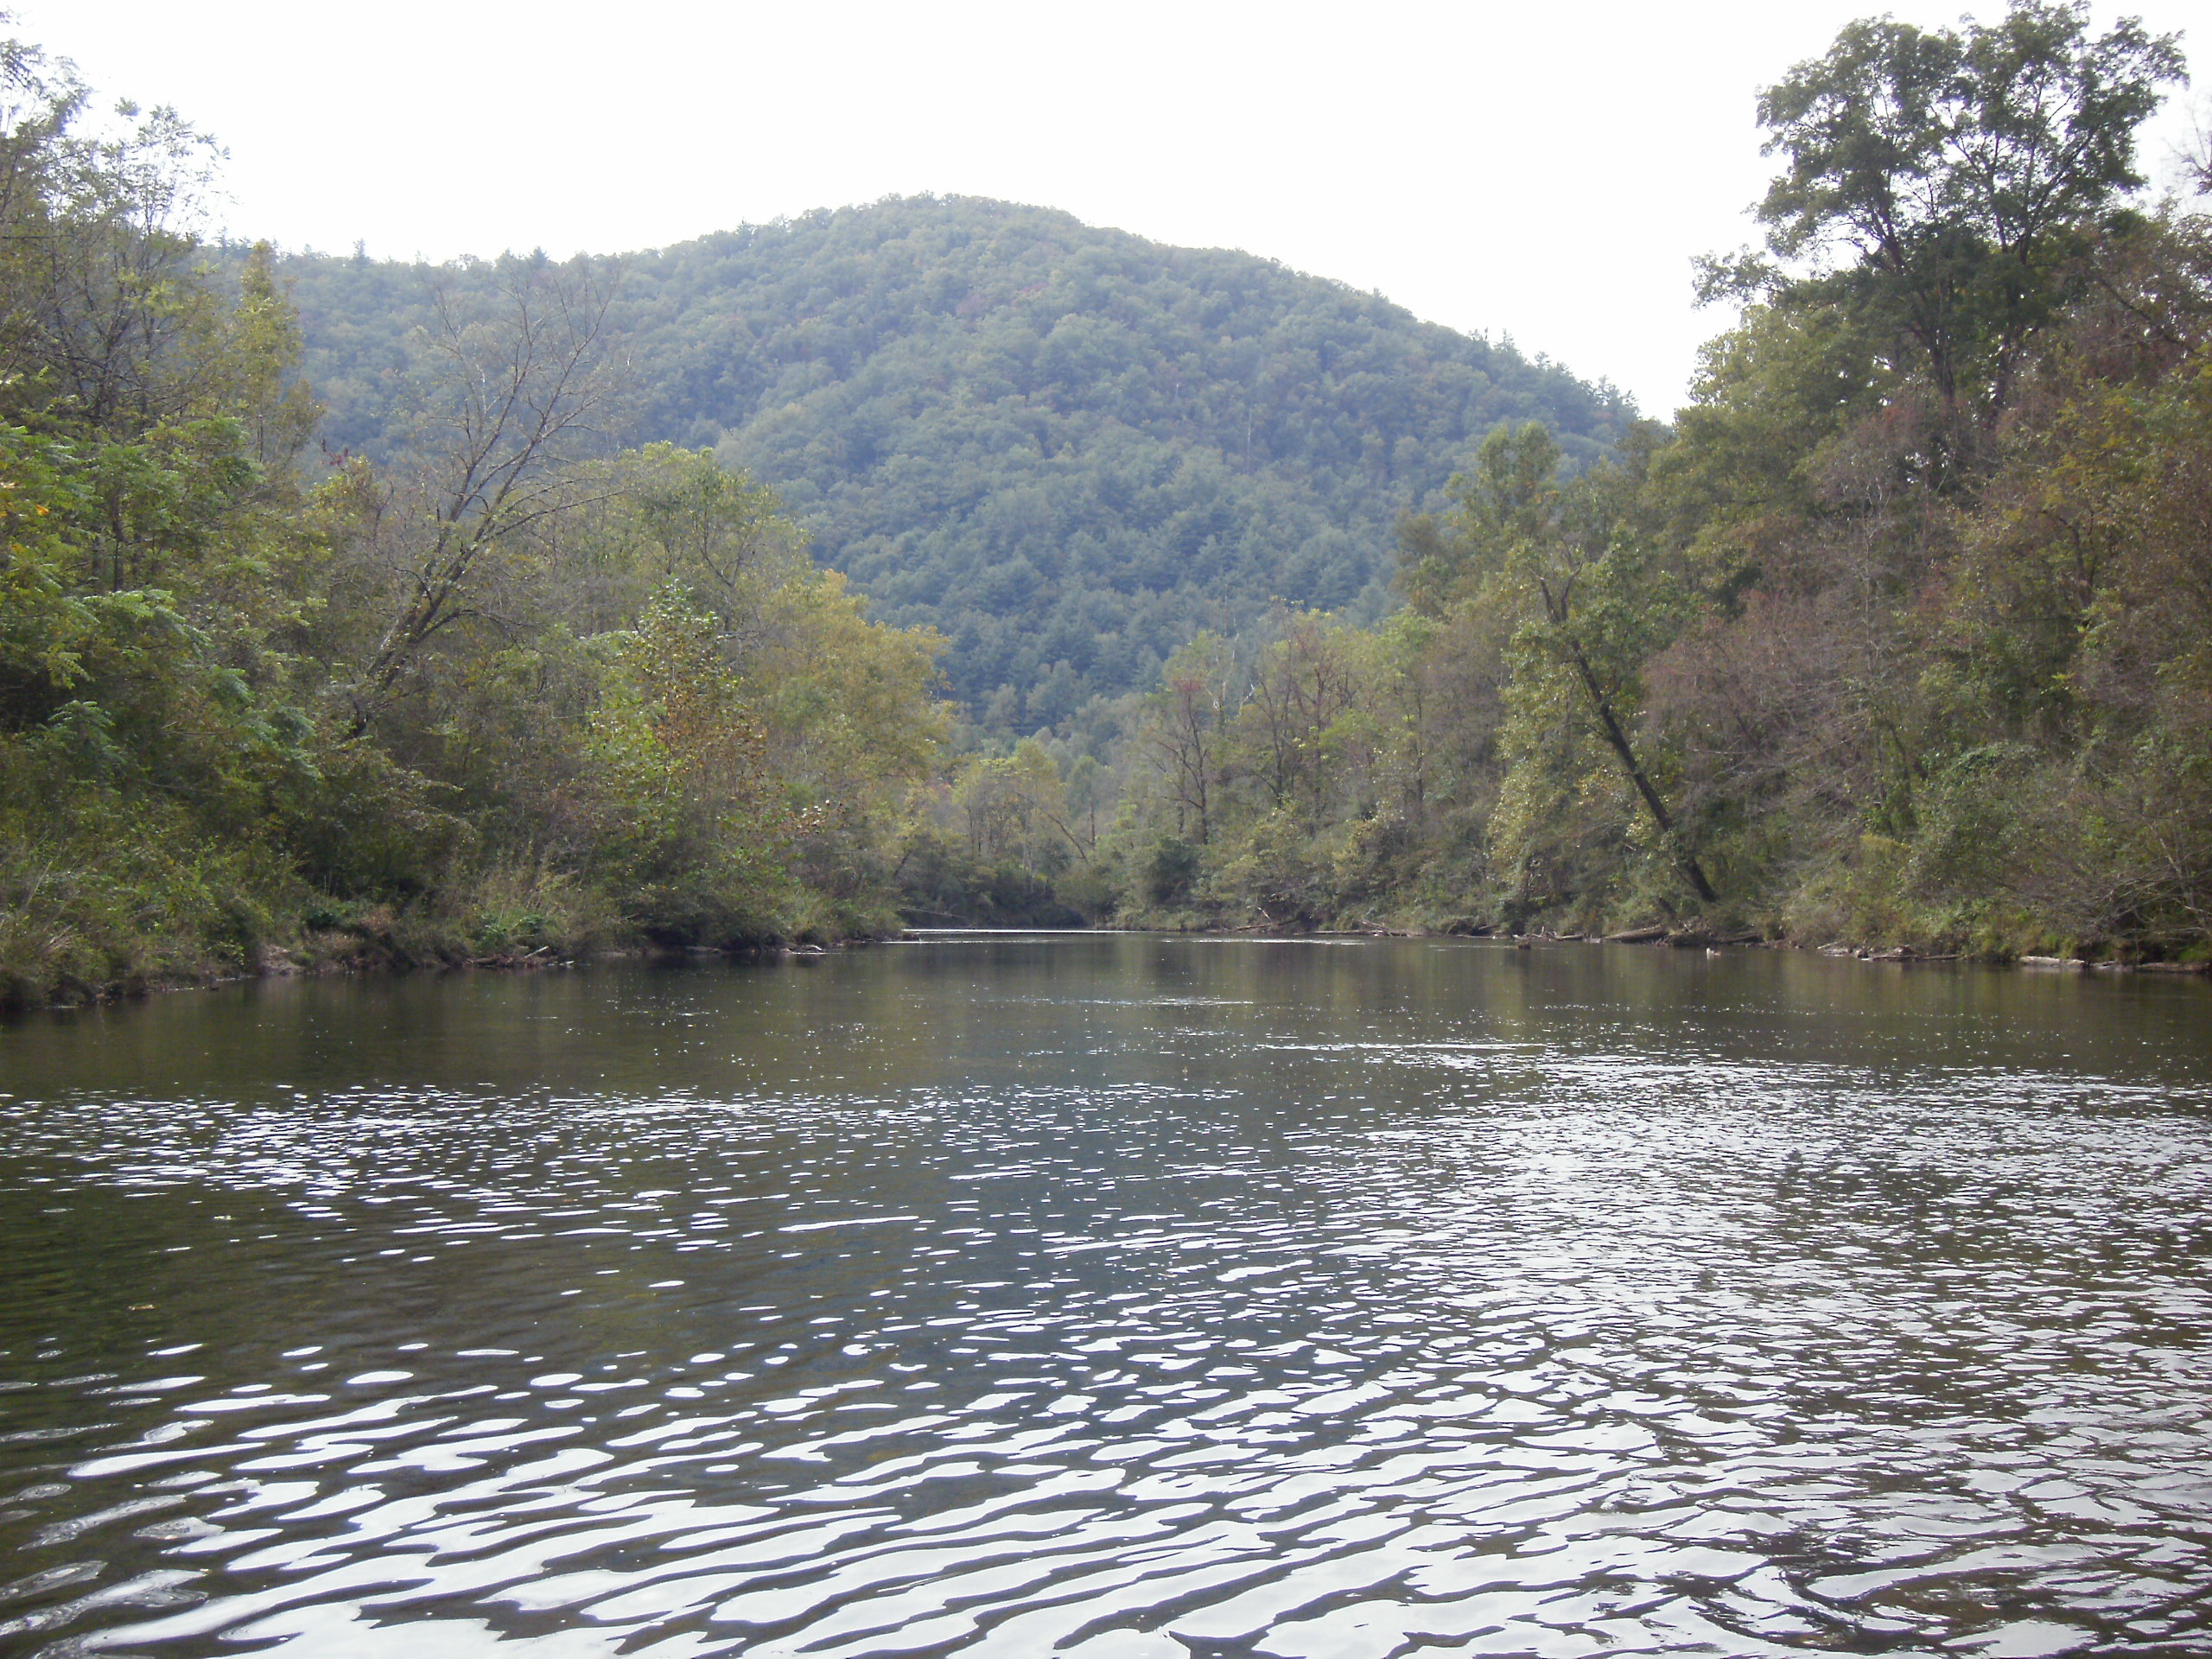 Downstream from West Fork Hole